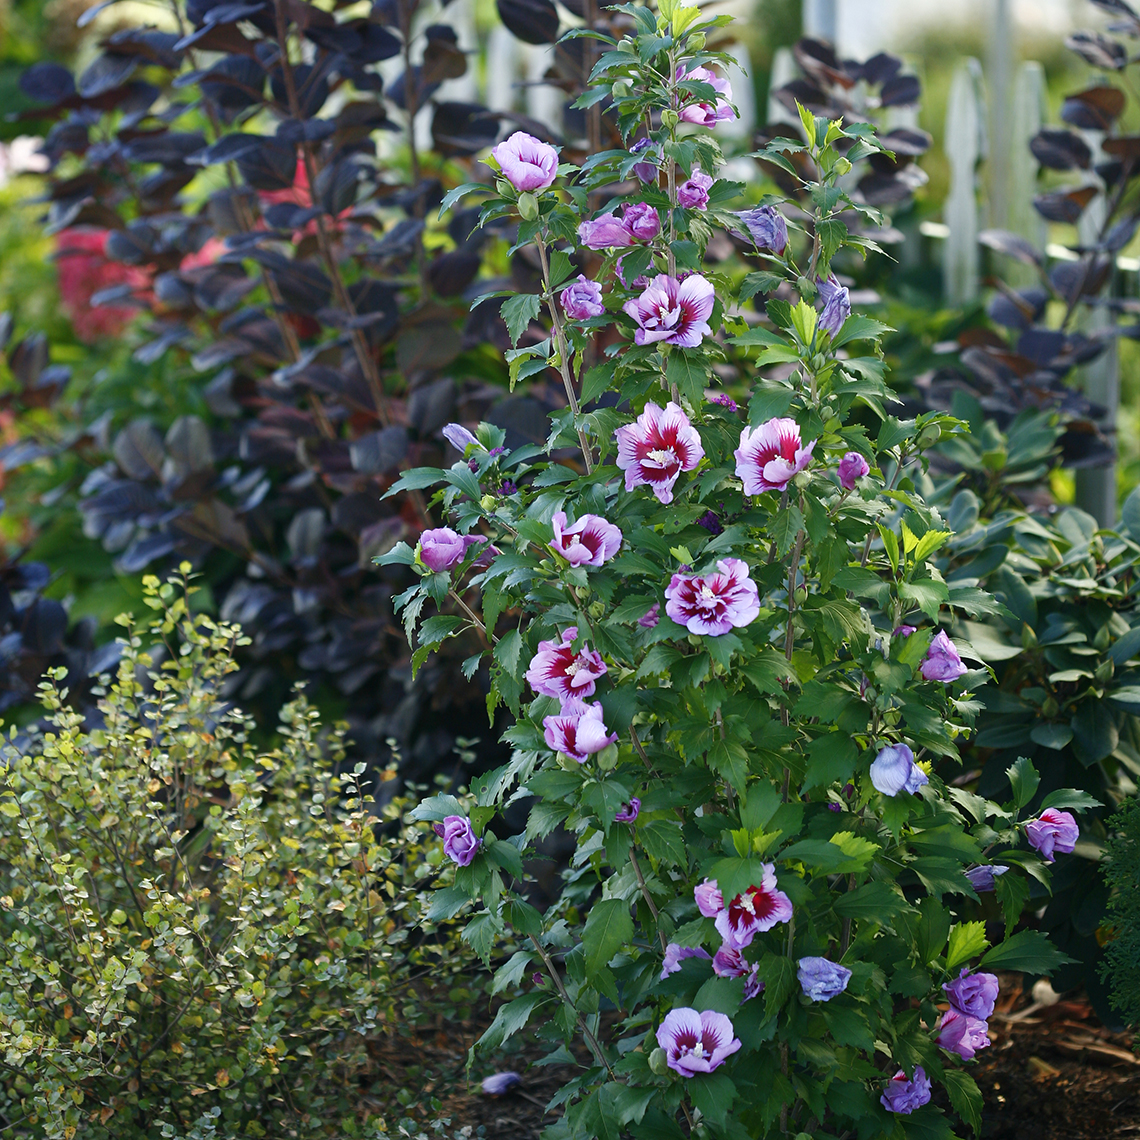 A single specimen of Purple Pillar rose of Sharon in bloom in a landscape surrounded by other leafy plants which include a purple leaf smokebush and a yellow dwarf birch